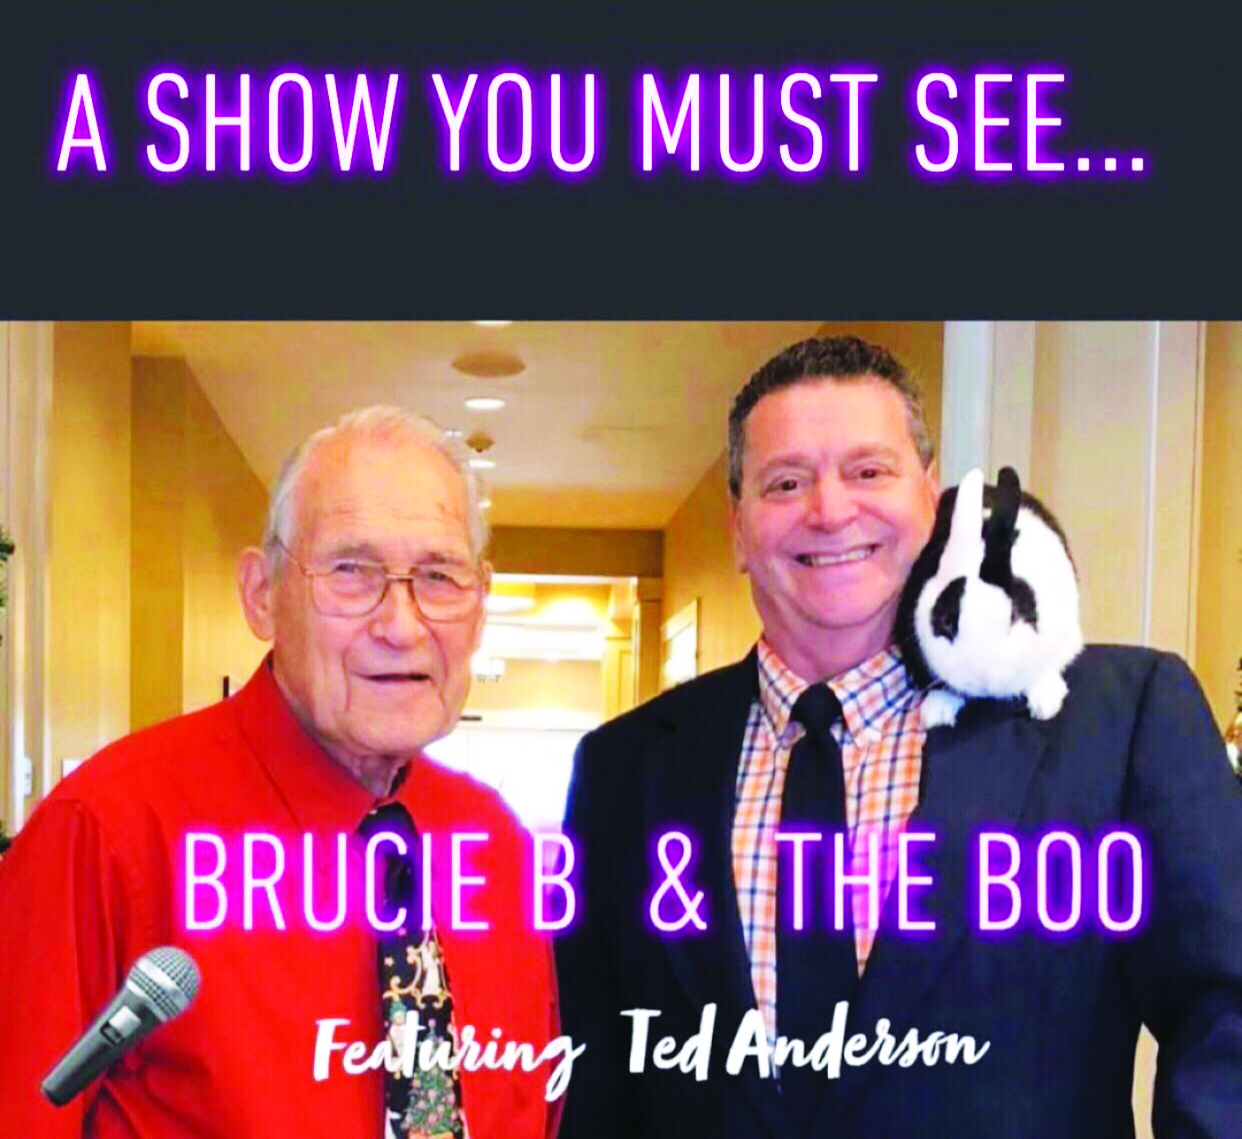 Bruce B & The Boo featuring Ted Anderson provide live entertainment for seniors